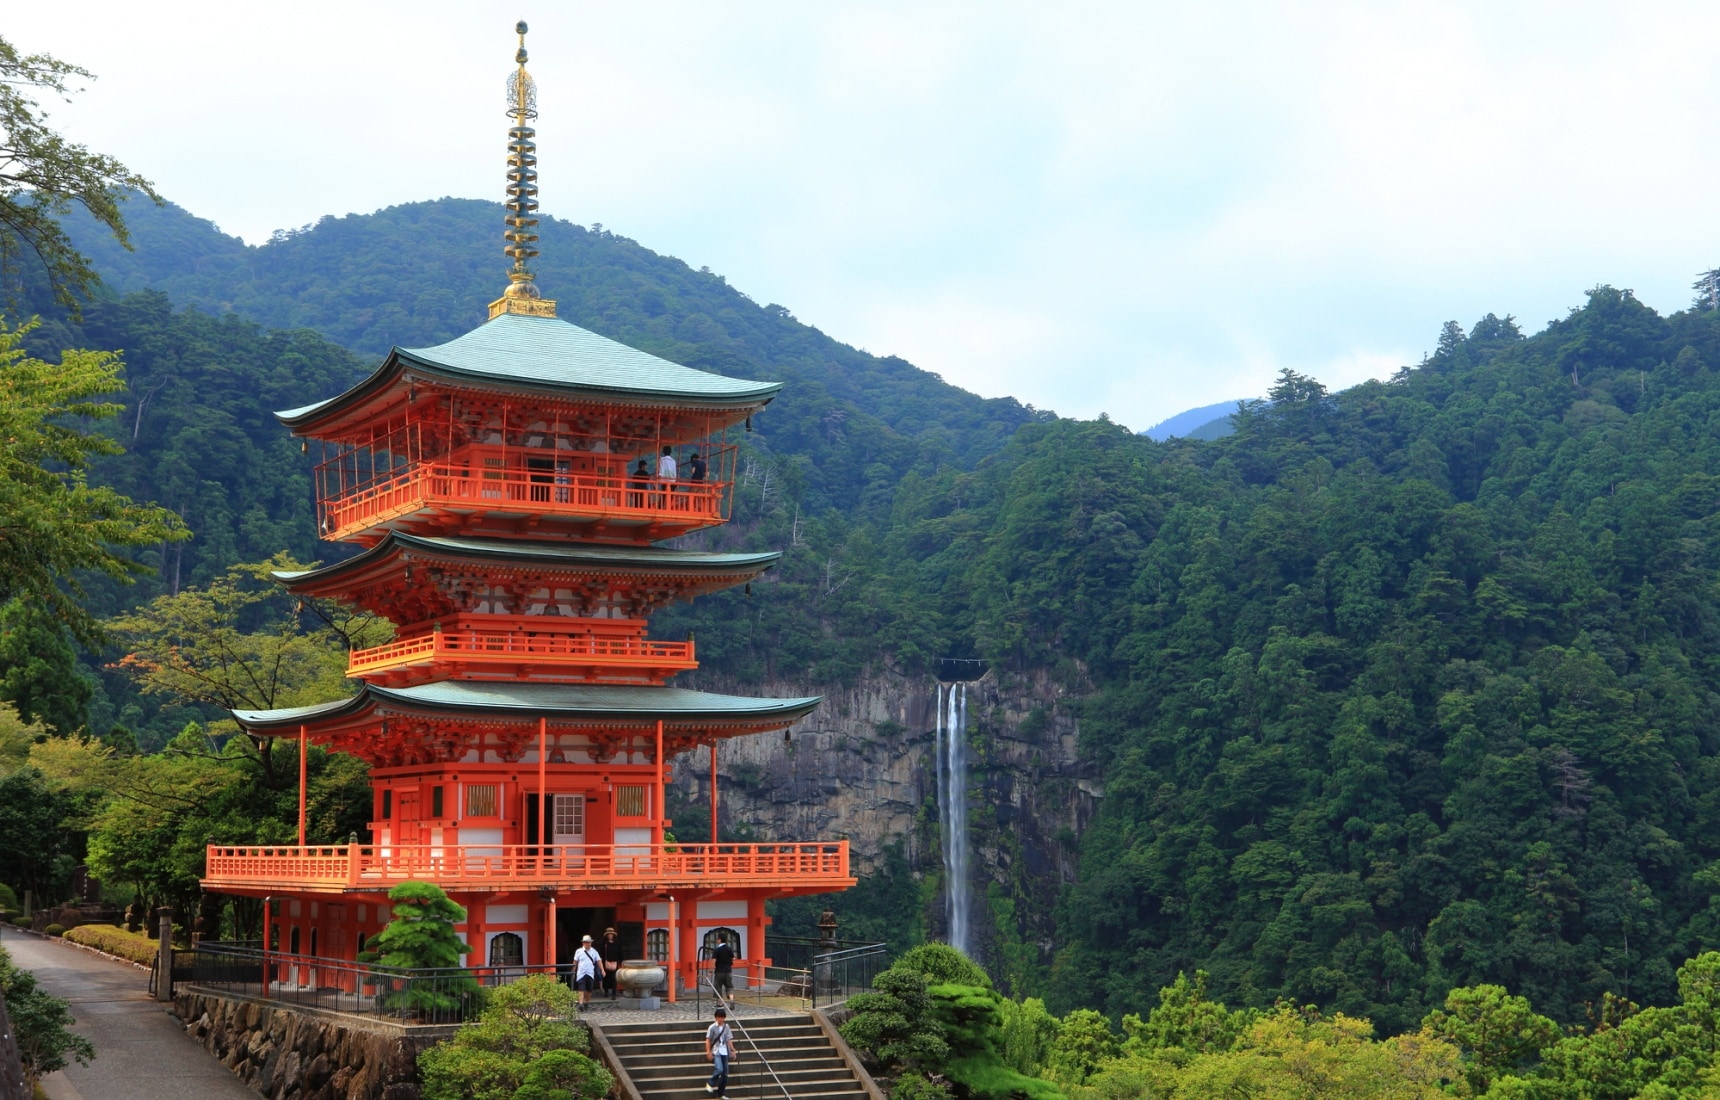 Top 10 Japanese Companies Over 800 Years Old | All About Japan
